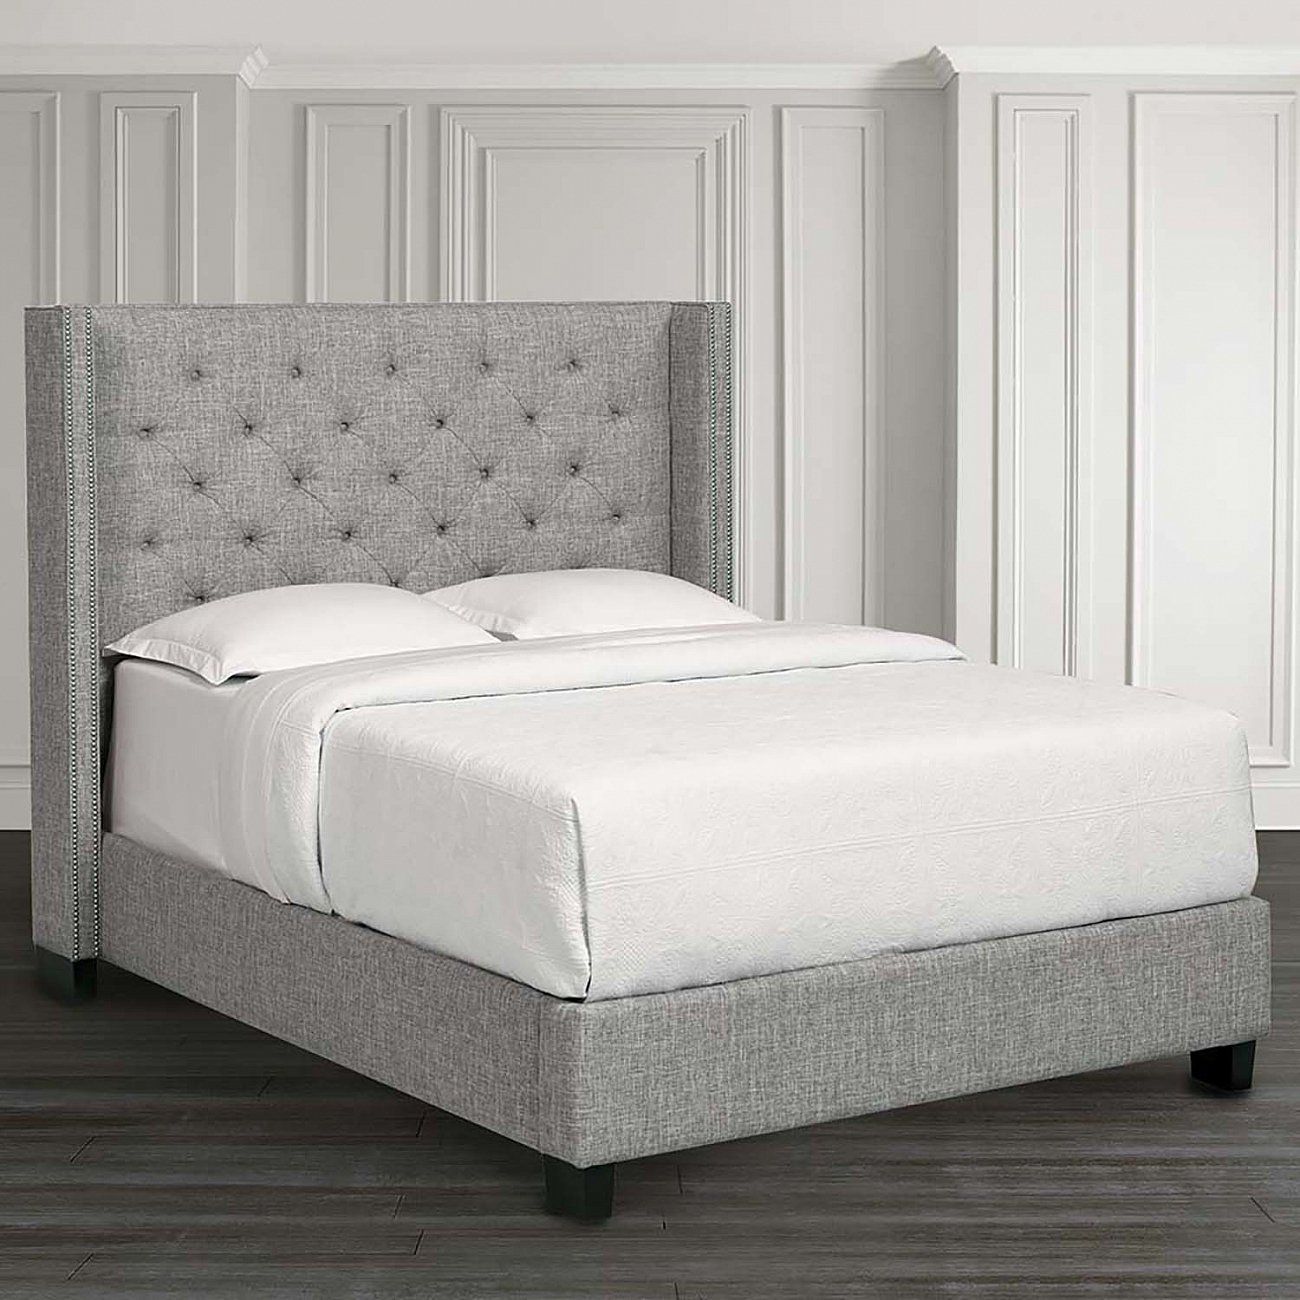 Semi-double teenage bed with carnations 140x200 cm gray-brown Wing